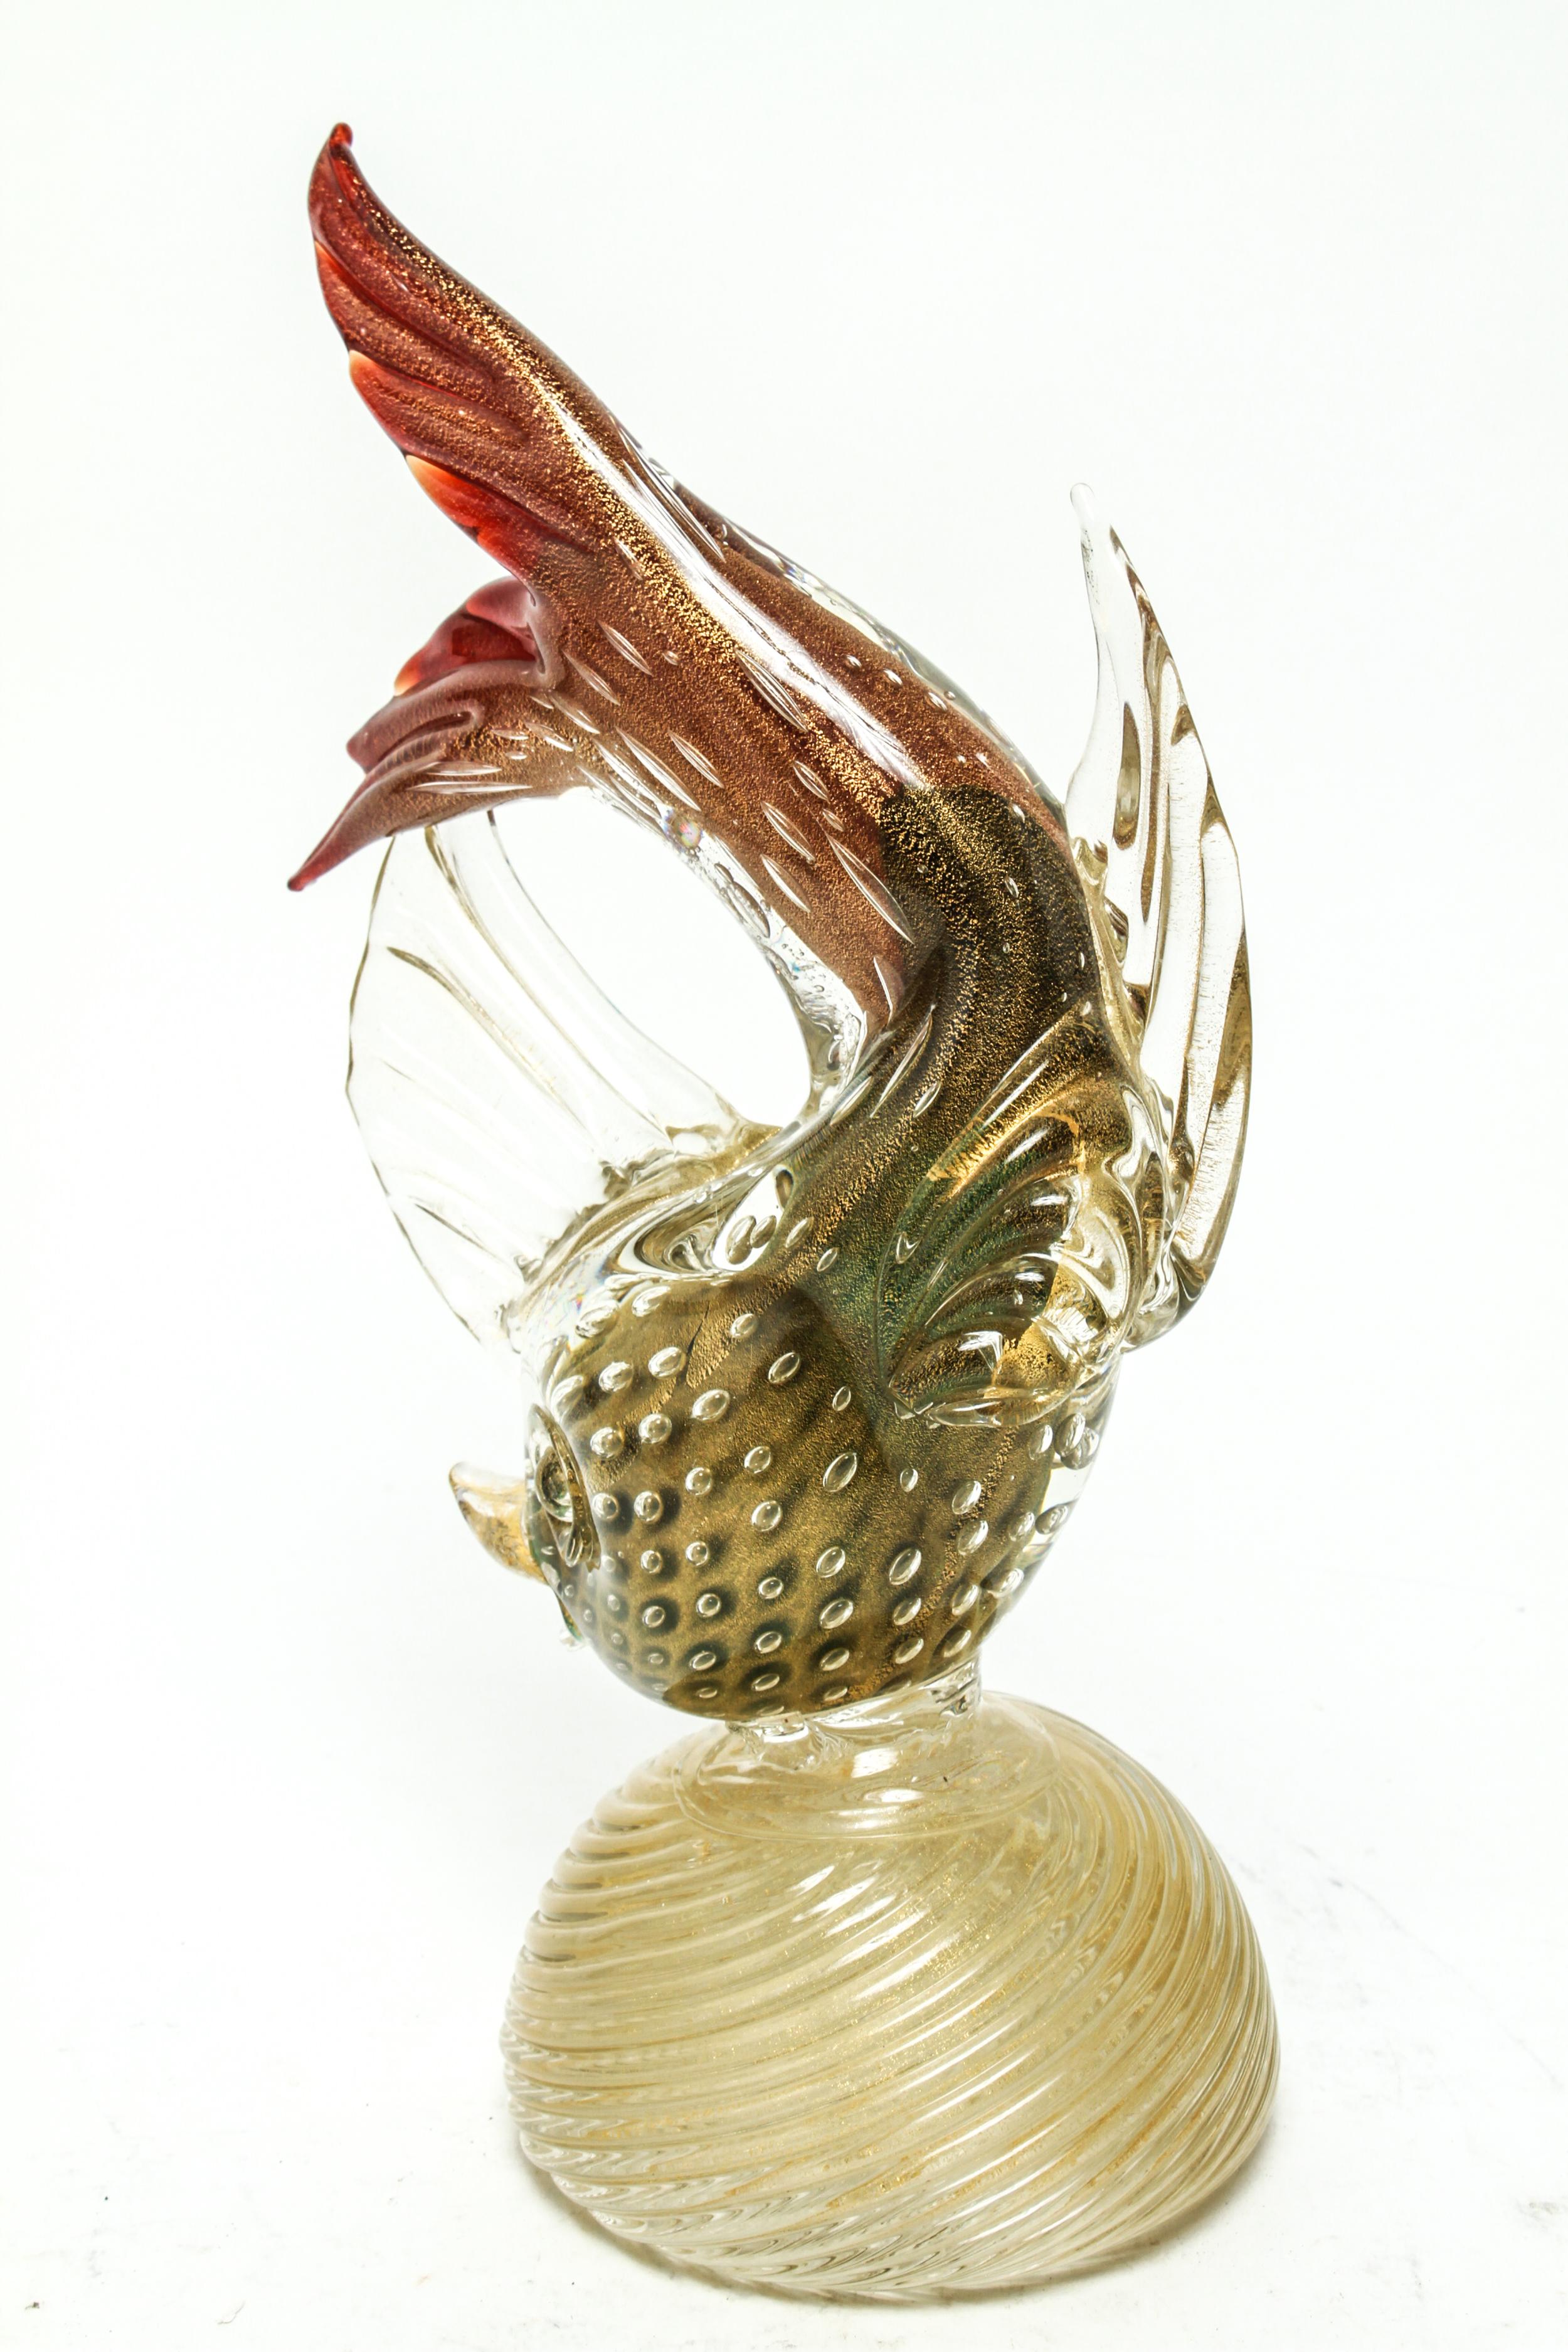 Italian Mid-Century Murano glass fish sculpture with a body made of gold flecked clear glass with controlled bubbles, fin ends in red, atop a spherical dome with spiral motif. The piece is in great vintage condition.